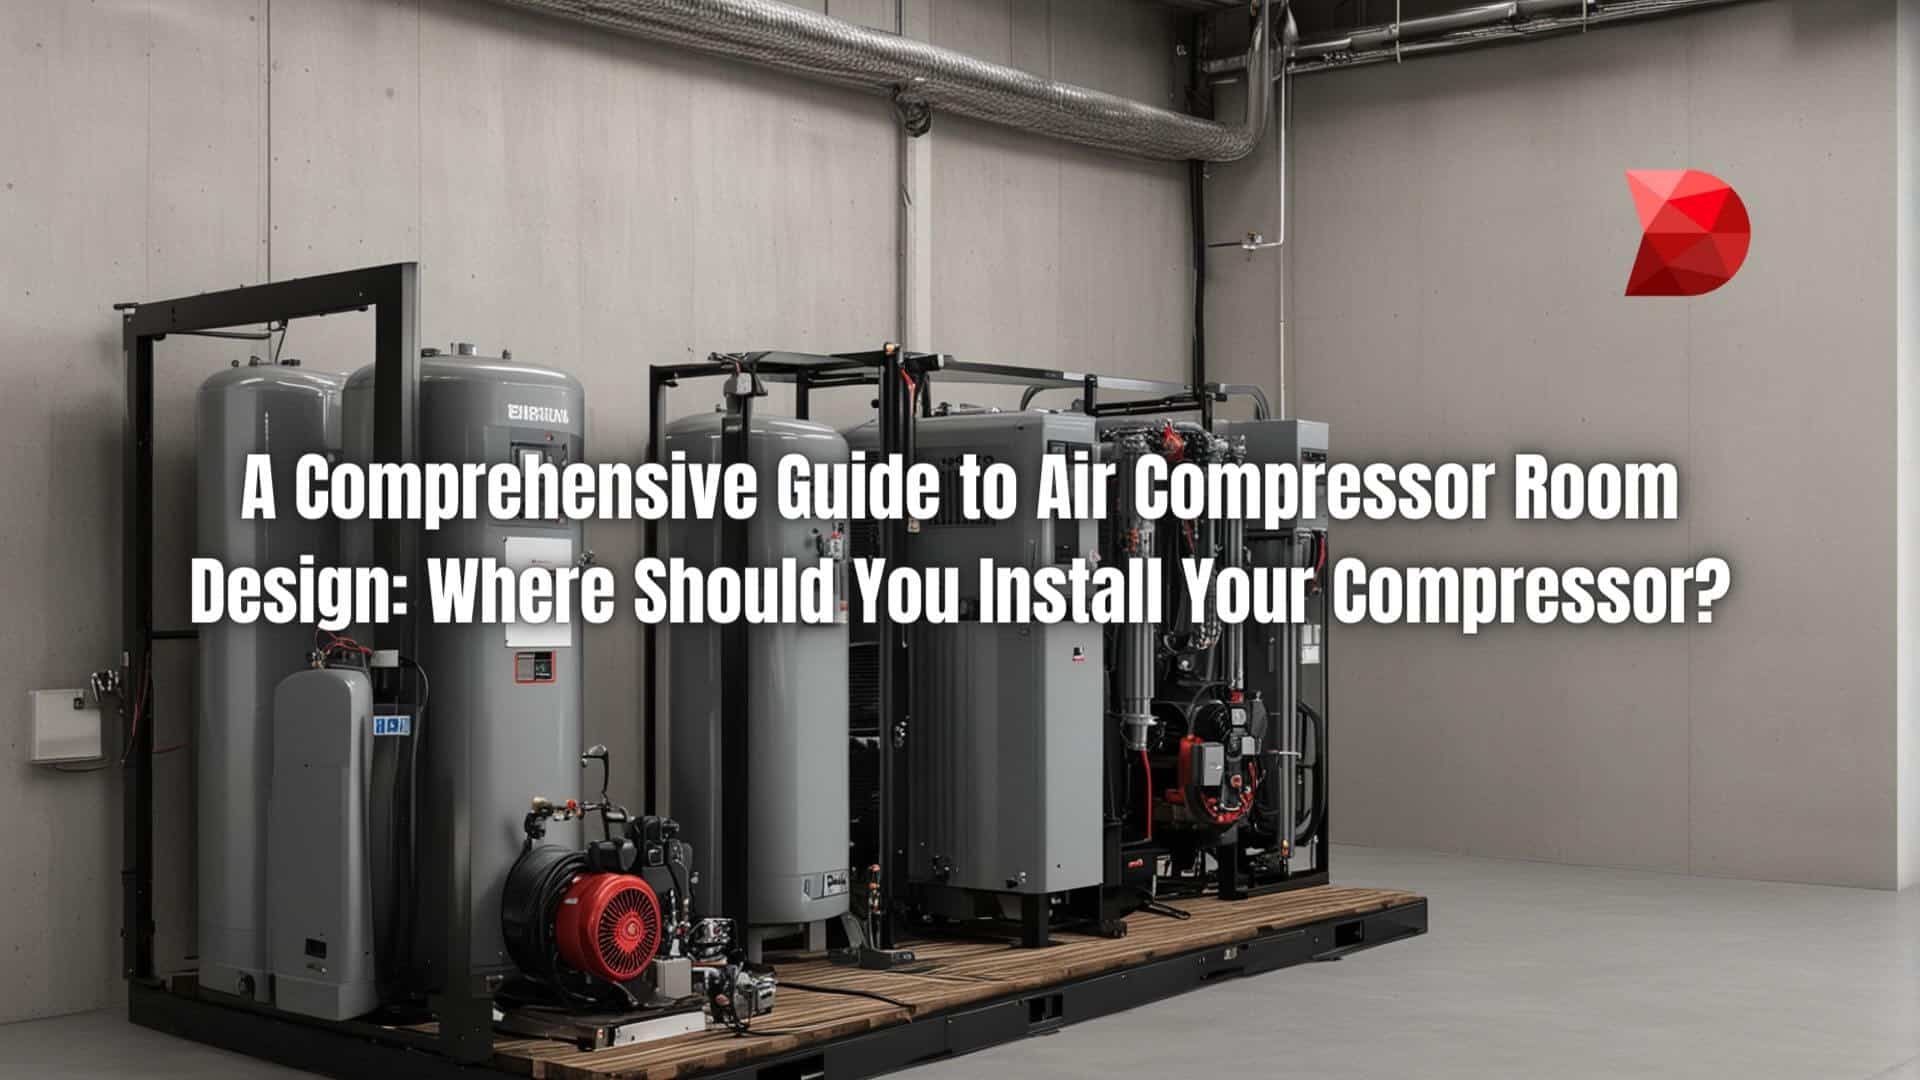 Get ahead in air compressor room design! Learn where to strategically install your compressor for optimal performance and efficiency.